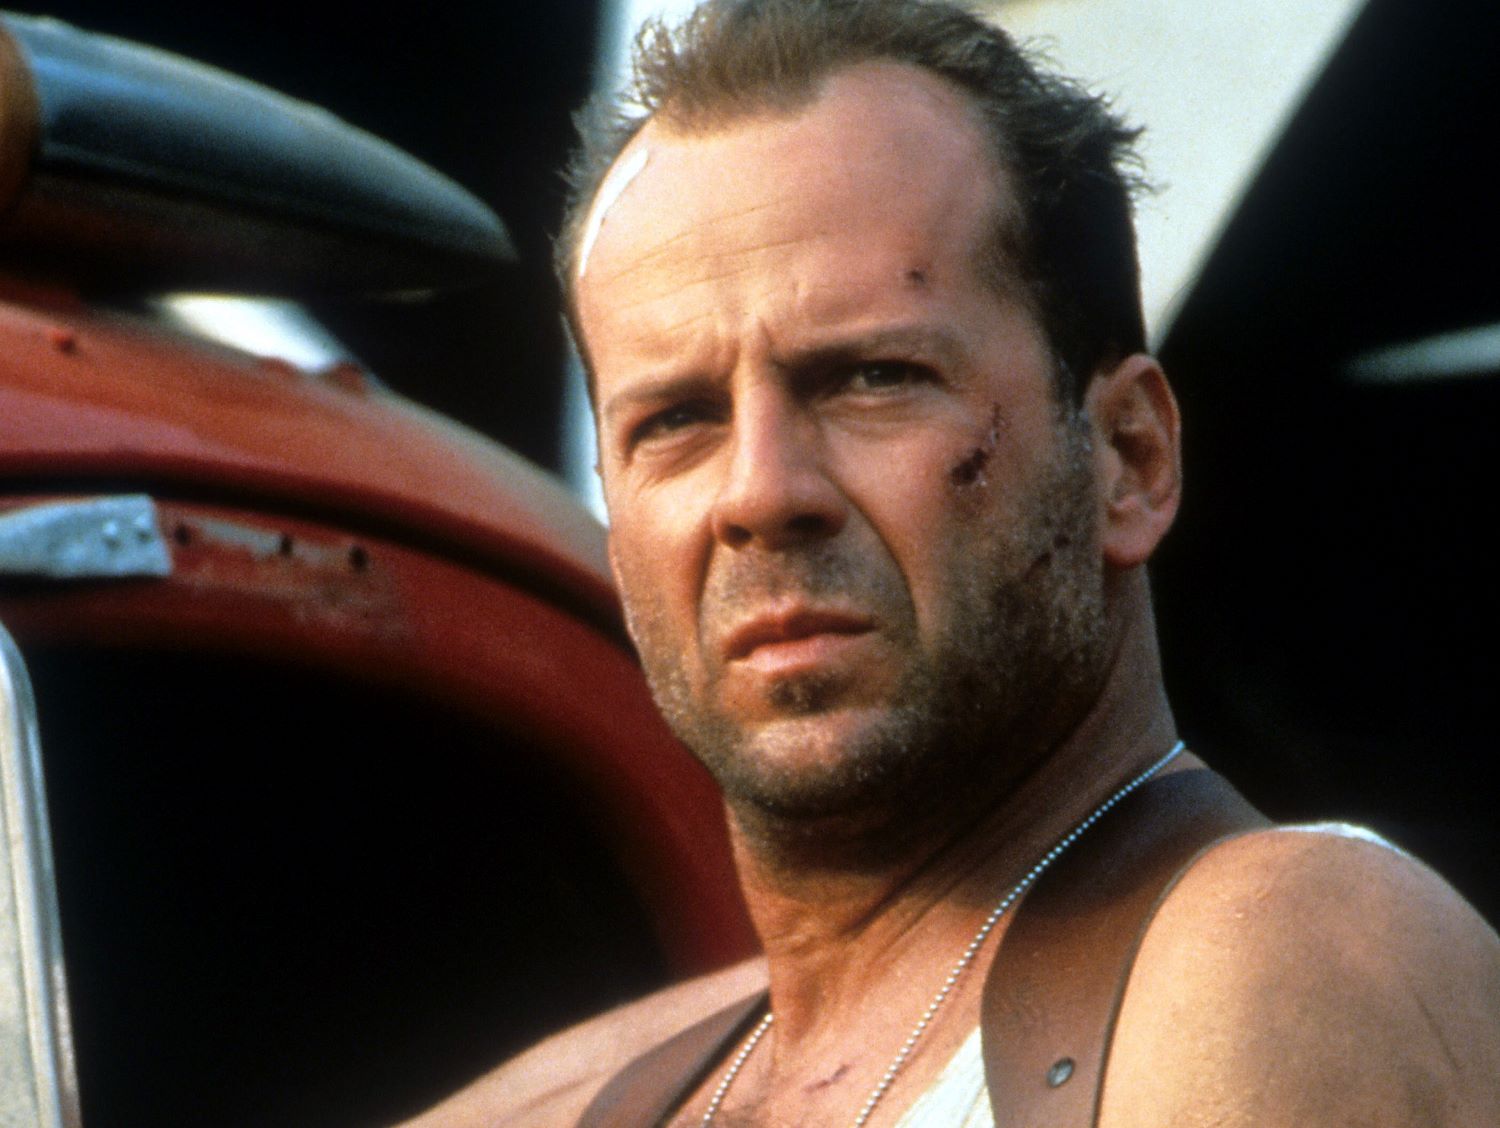 Bruce Willis in 'Die Hard With a Vengeance'